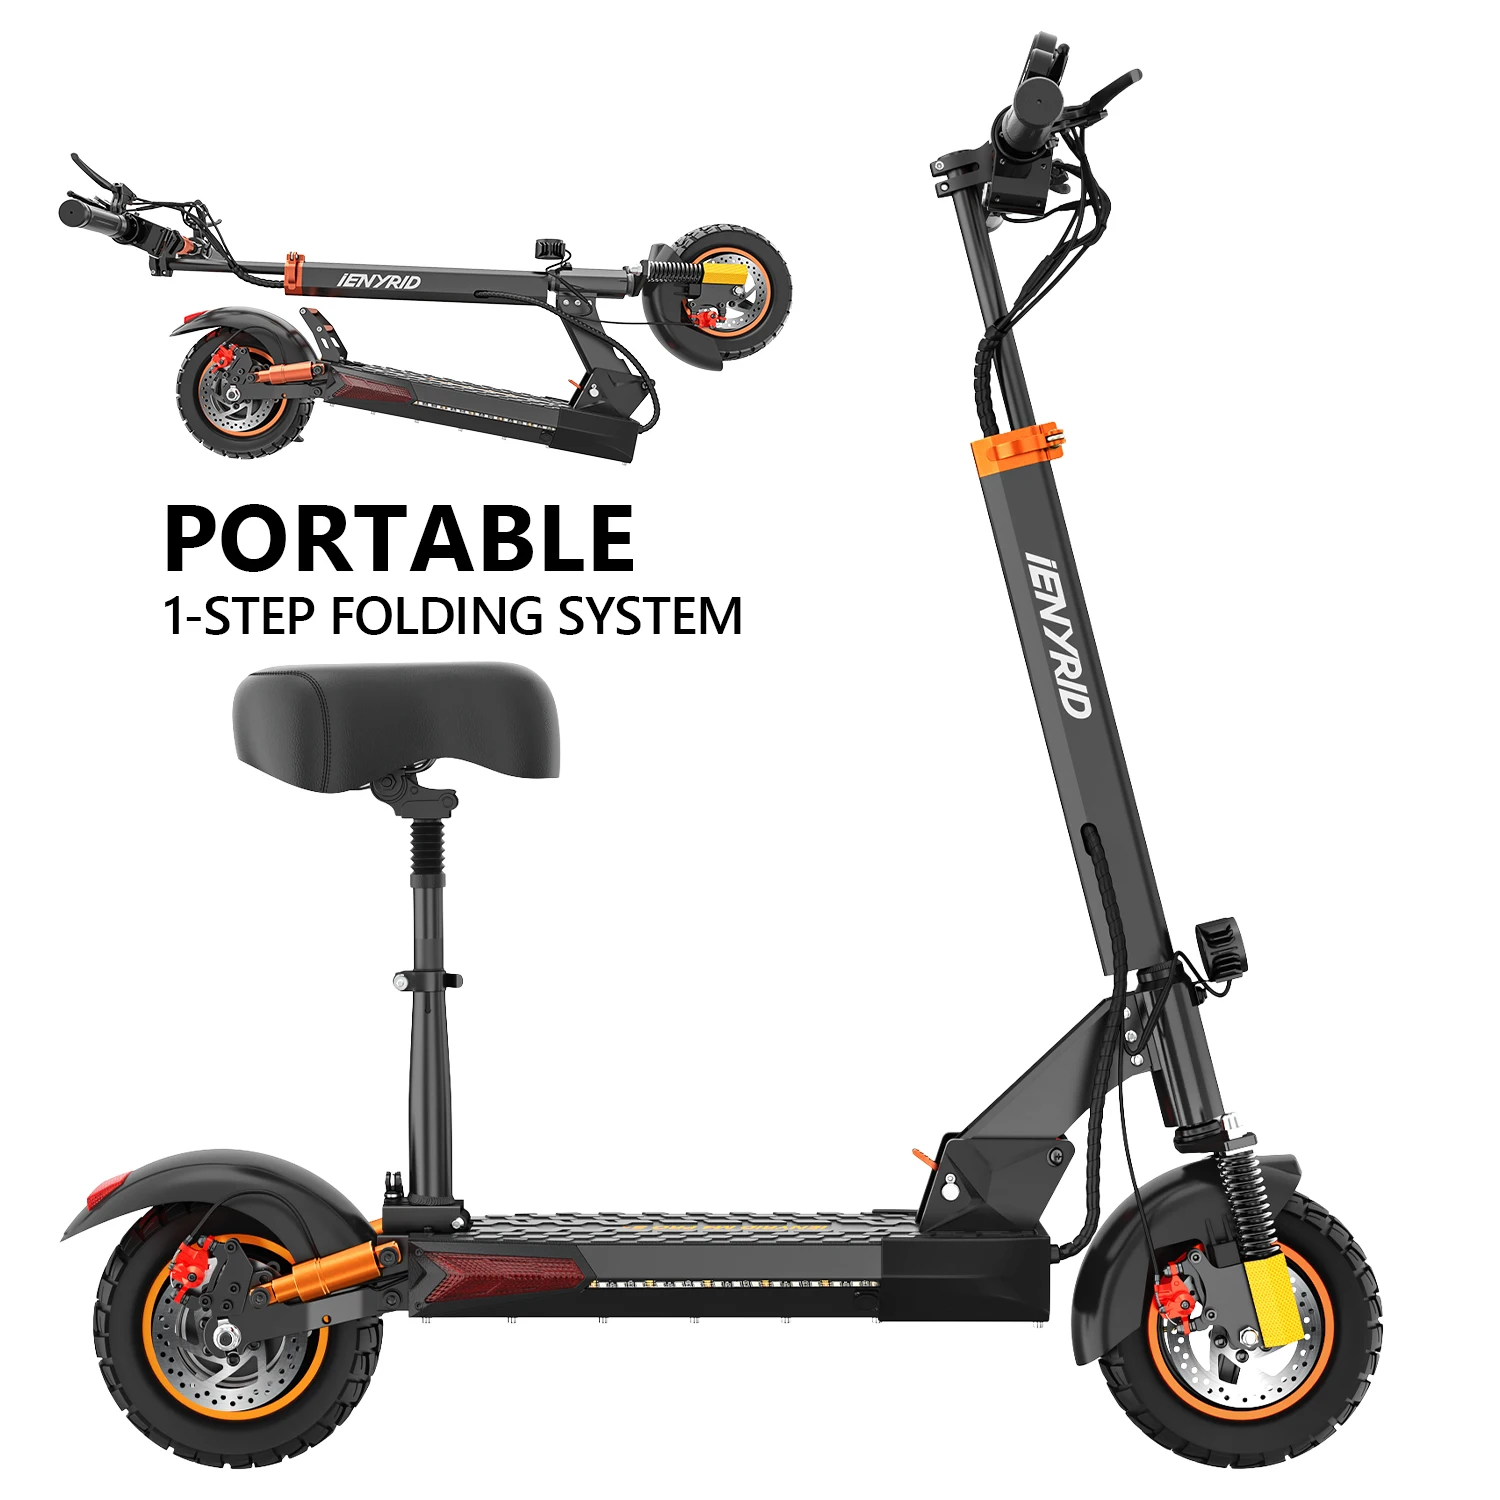 

US UK Stock iENYRID M4 PRO S+ 16AH Electric Scooter 10" Off-road Tires 800W Motor Folding Scooter e scooter Kugoo iE M4 PRO